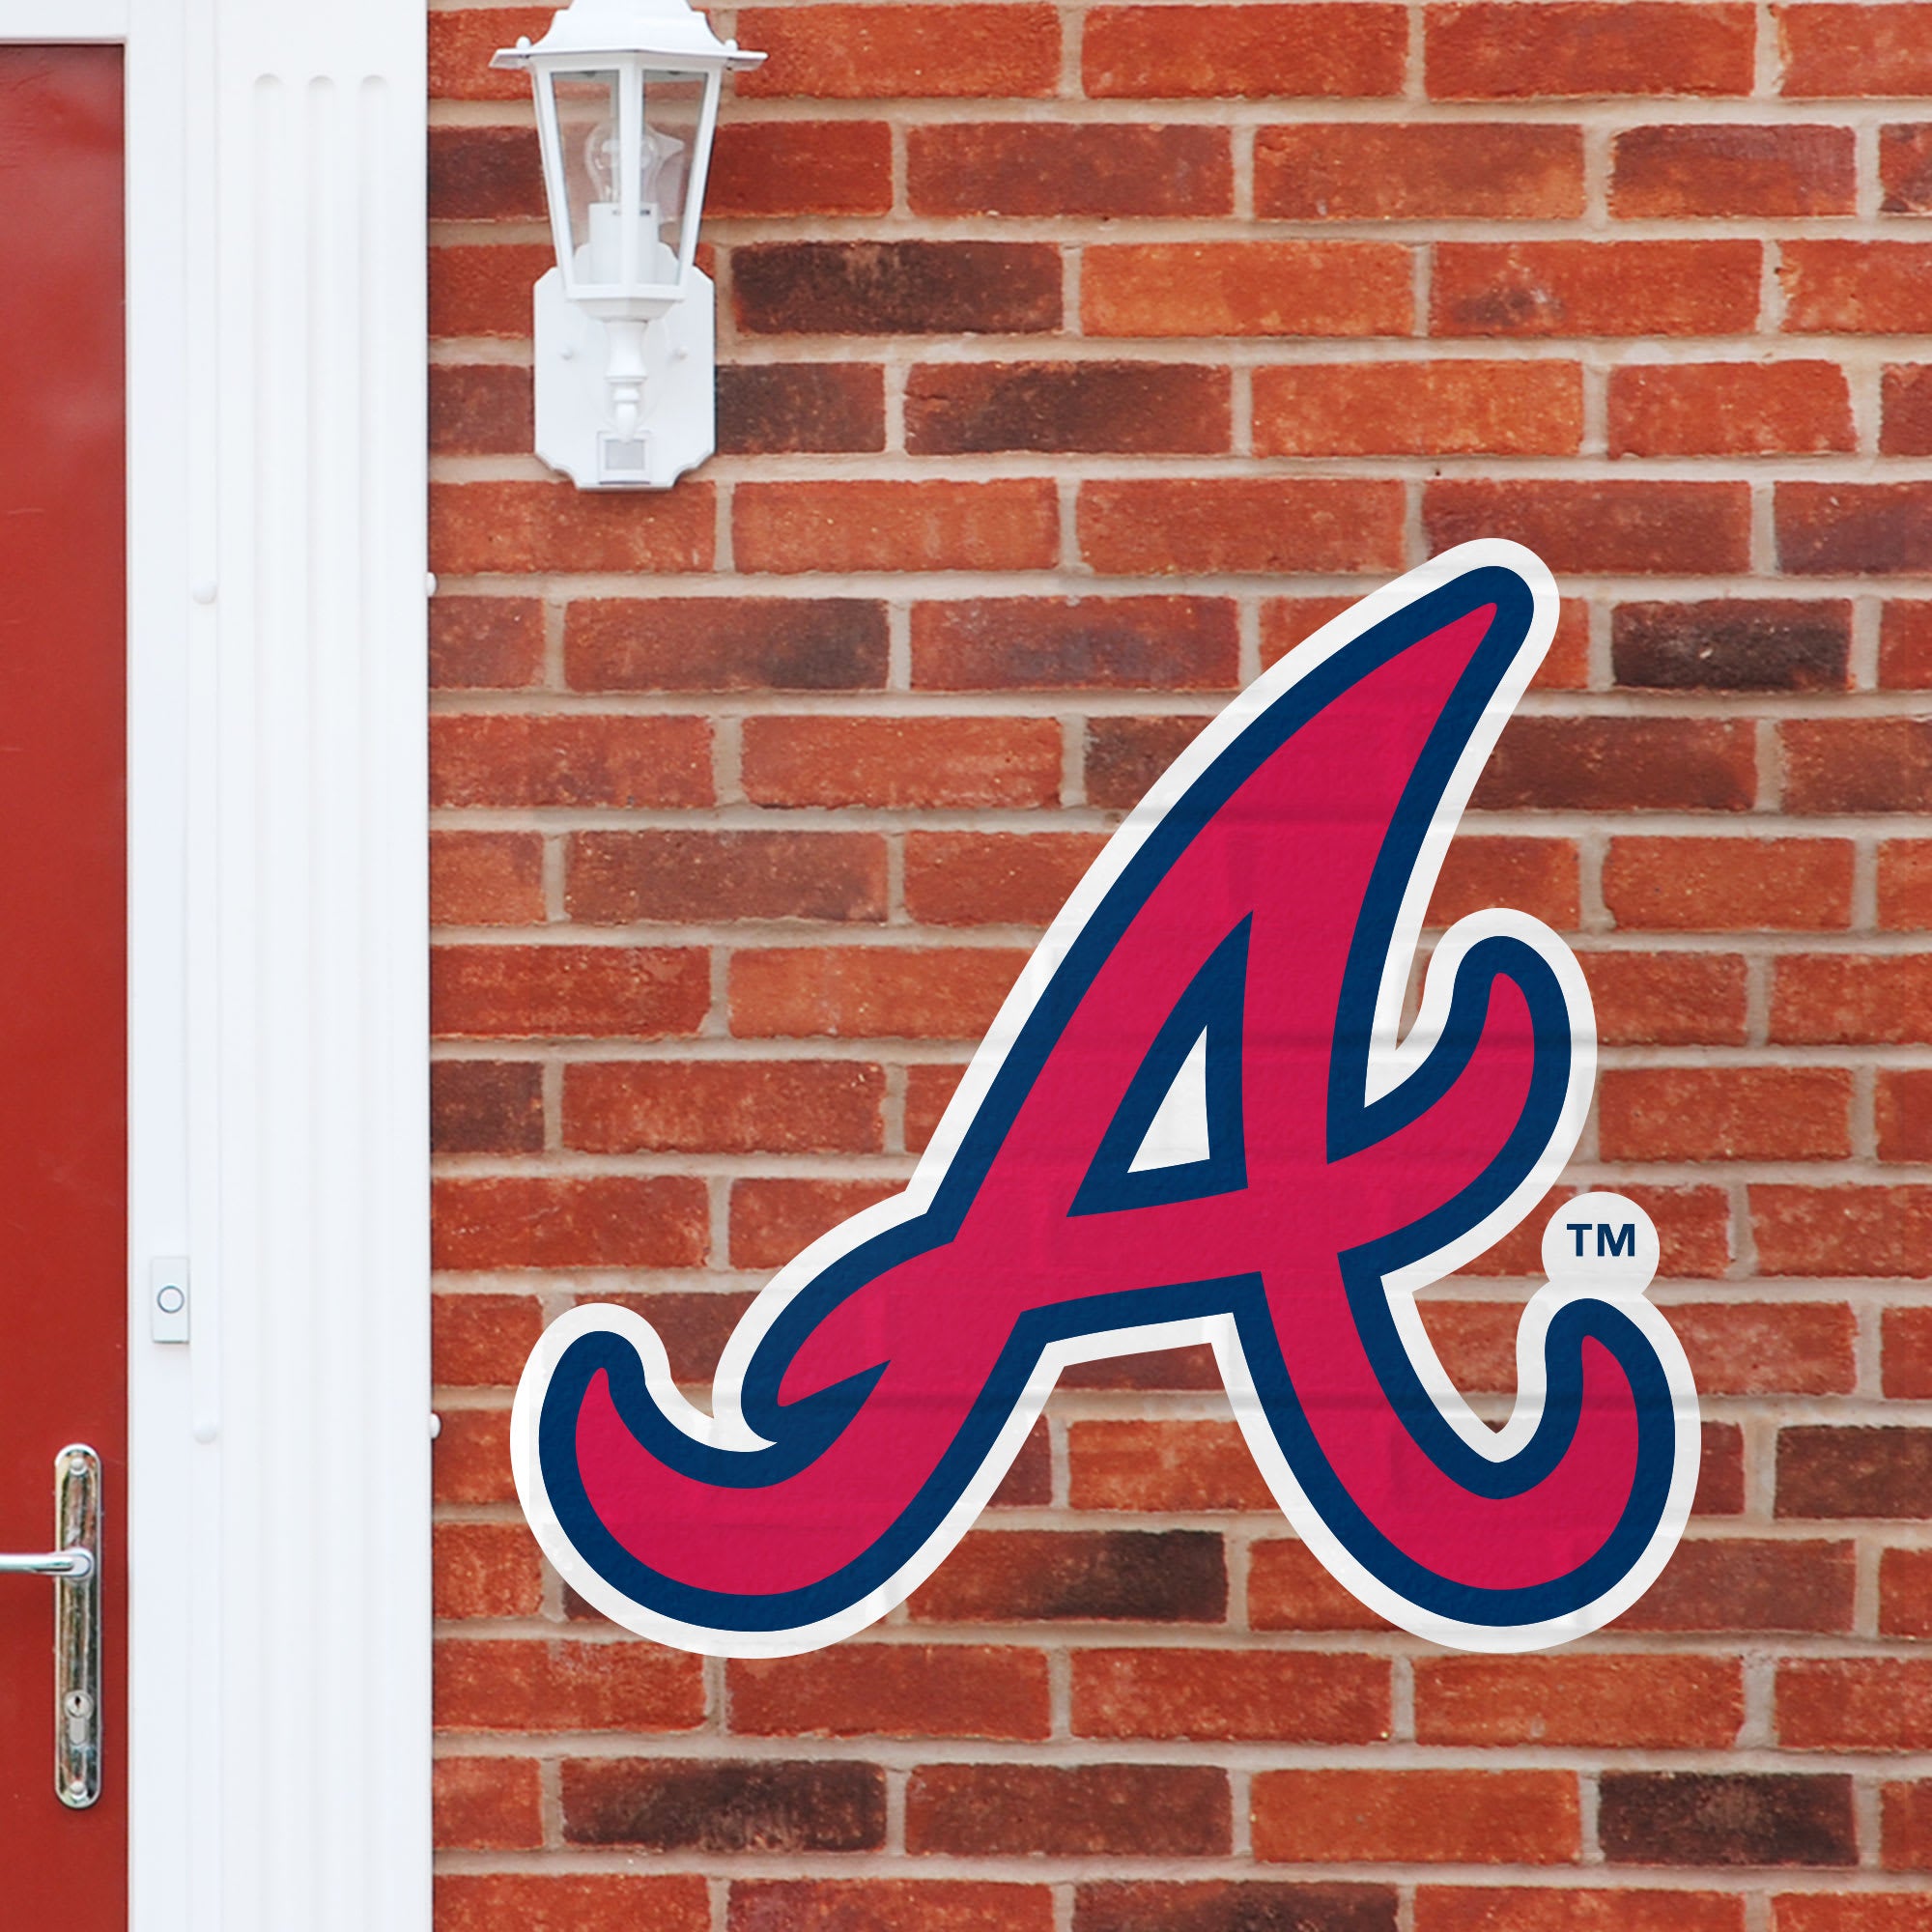 Atlanta Braves: Logo - Officially Licensed MLB Outdoor Graphic Giant Logo (30"W x 30"H) by Fathead | Wood/Aluminum